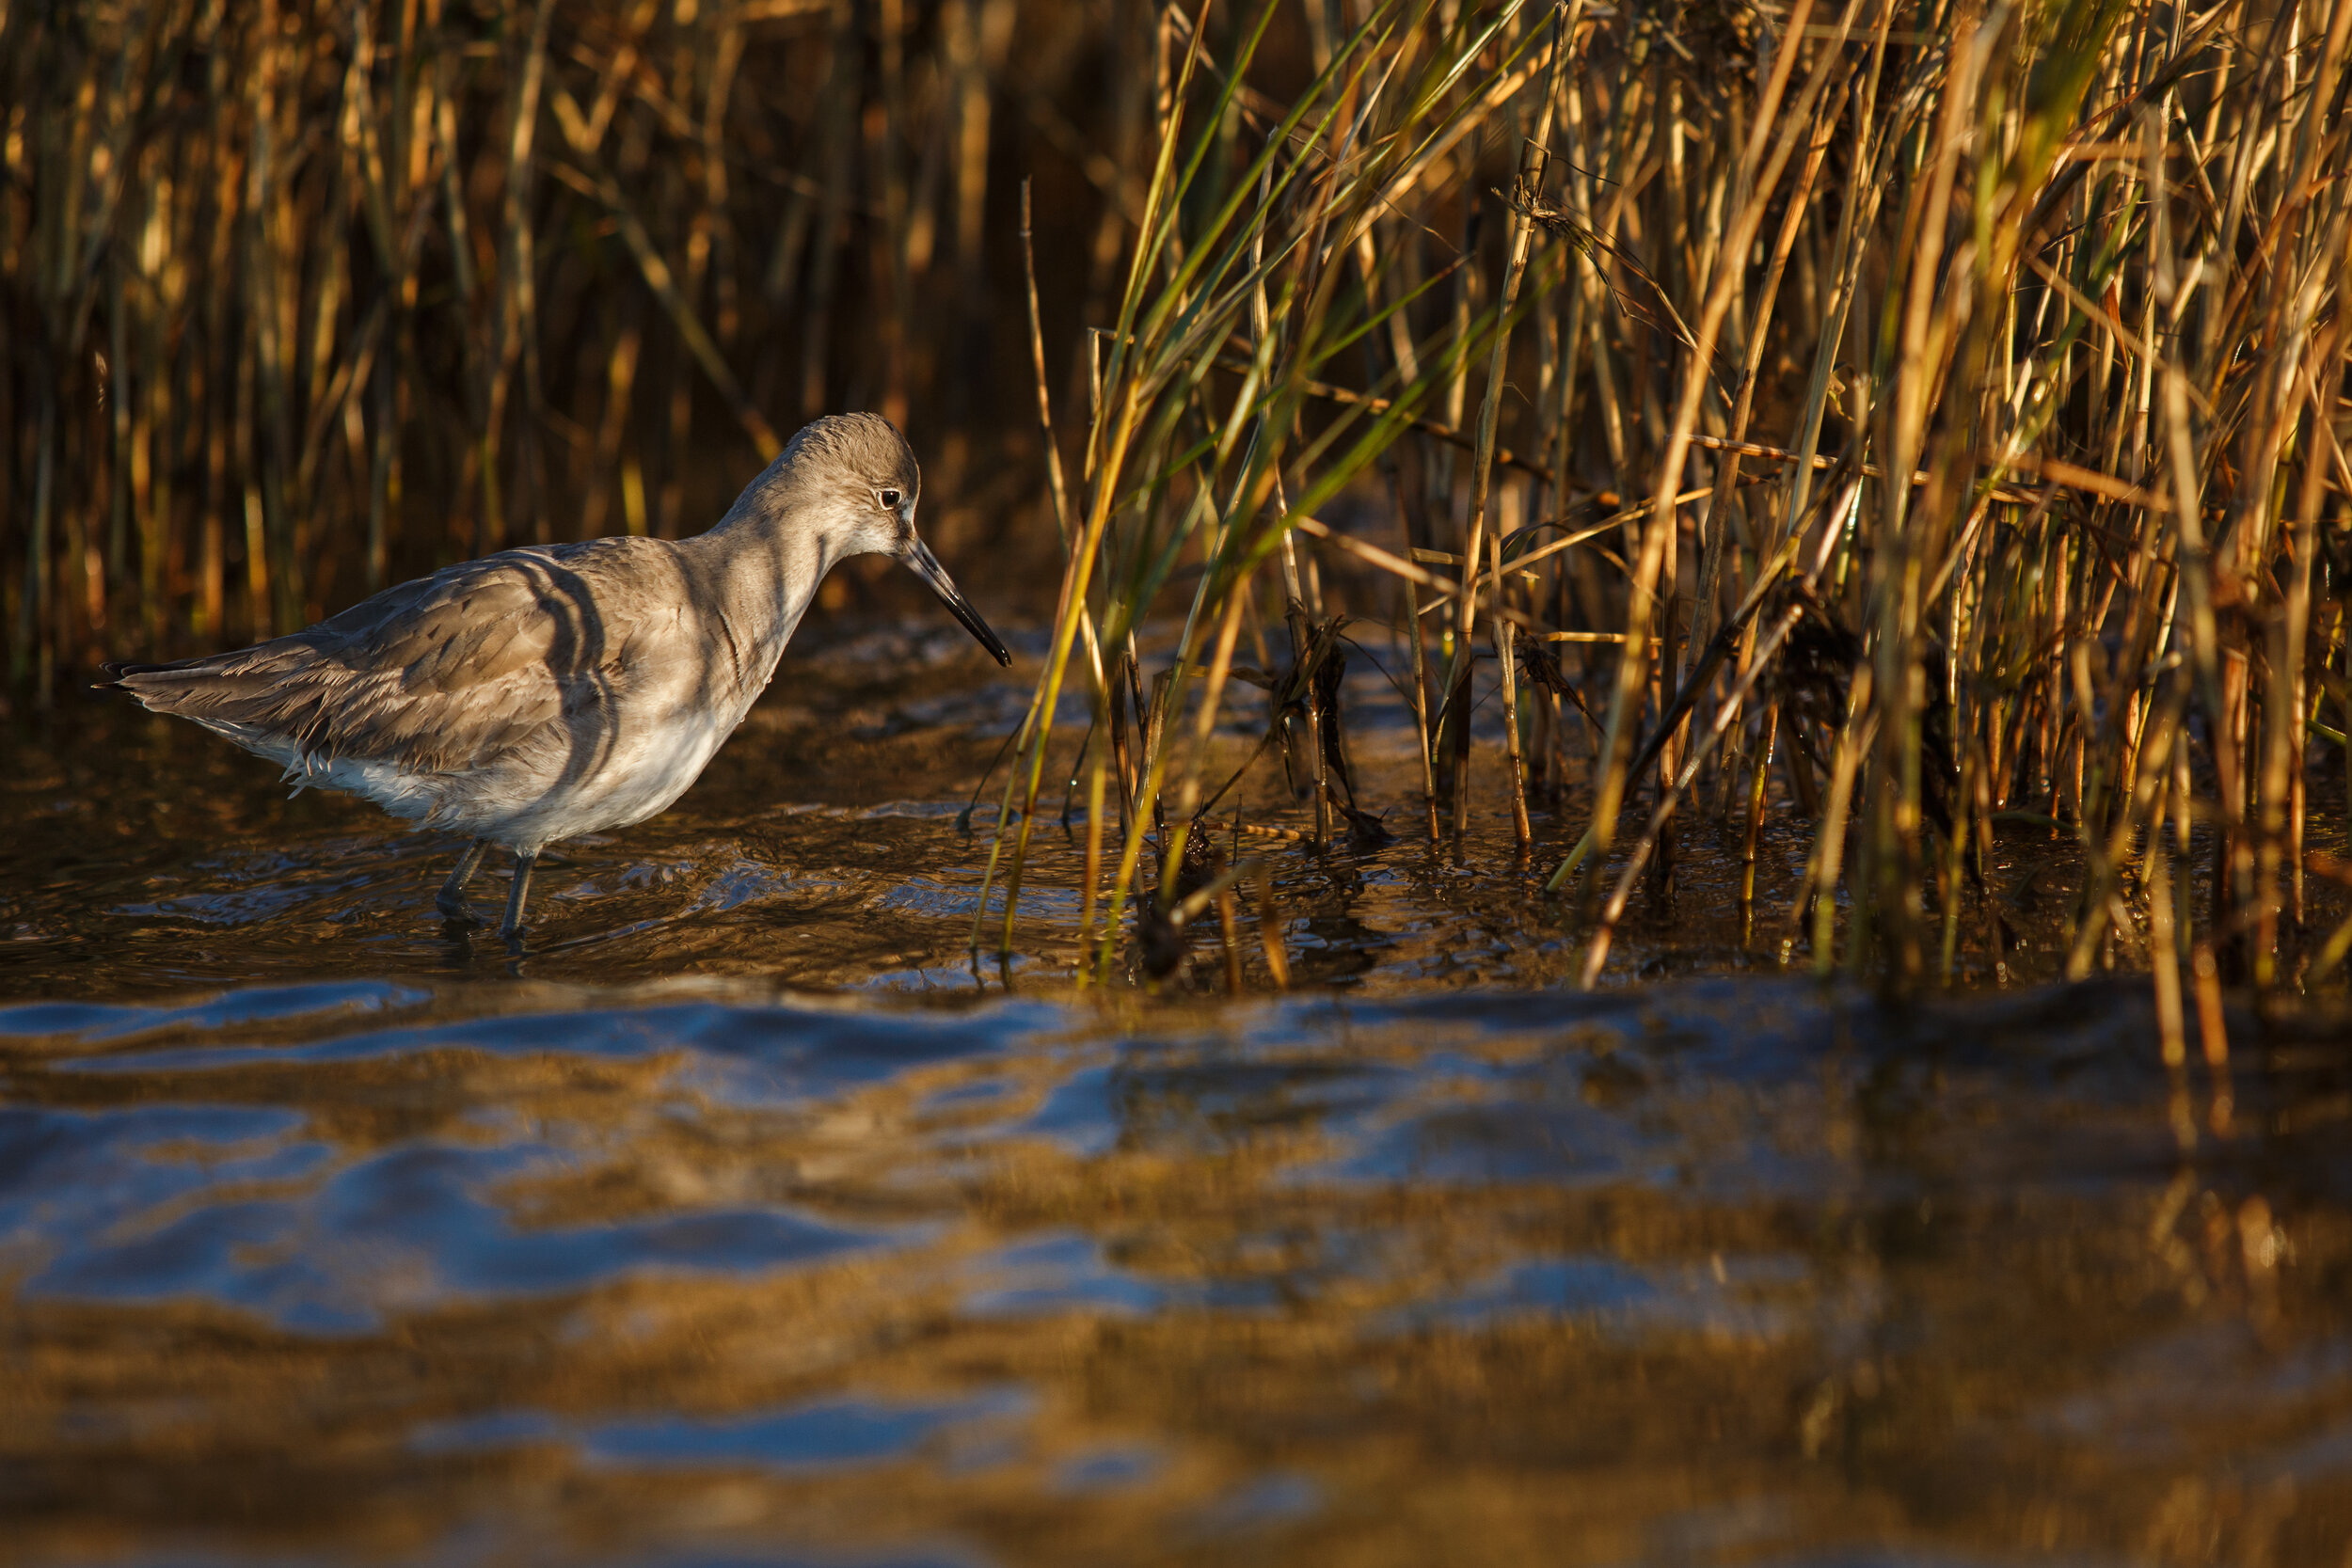  A climate-endangered species of sandpiper known as a Willet ( Tringa semipalmata ) searches for prey in the balding marsh grass at the edge of the cemetery. 